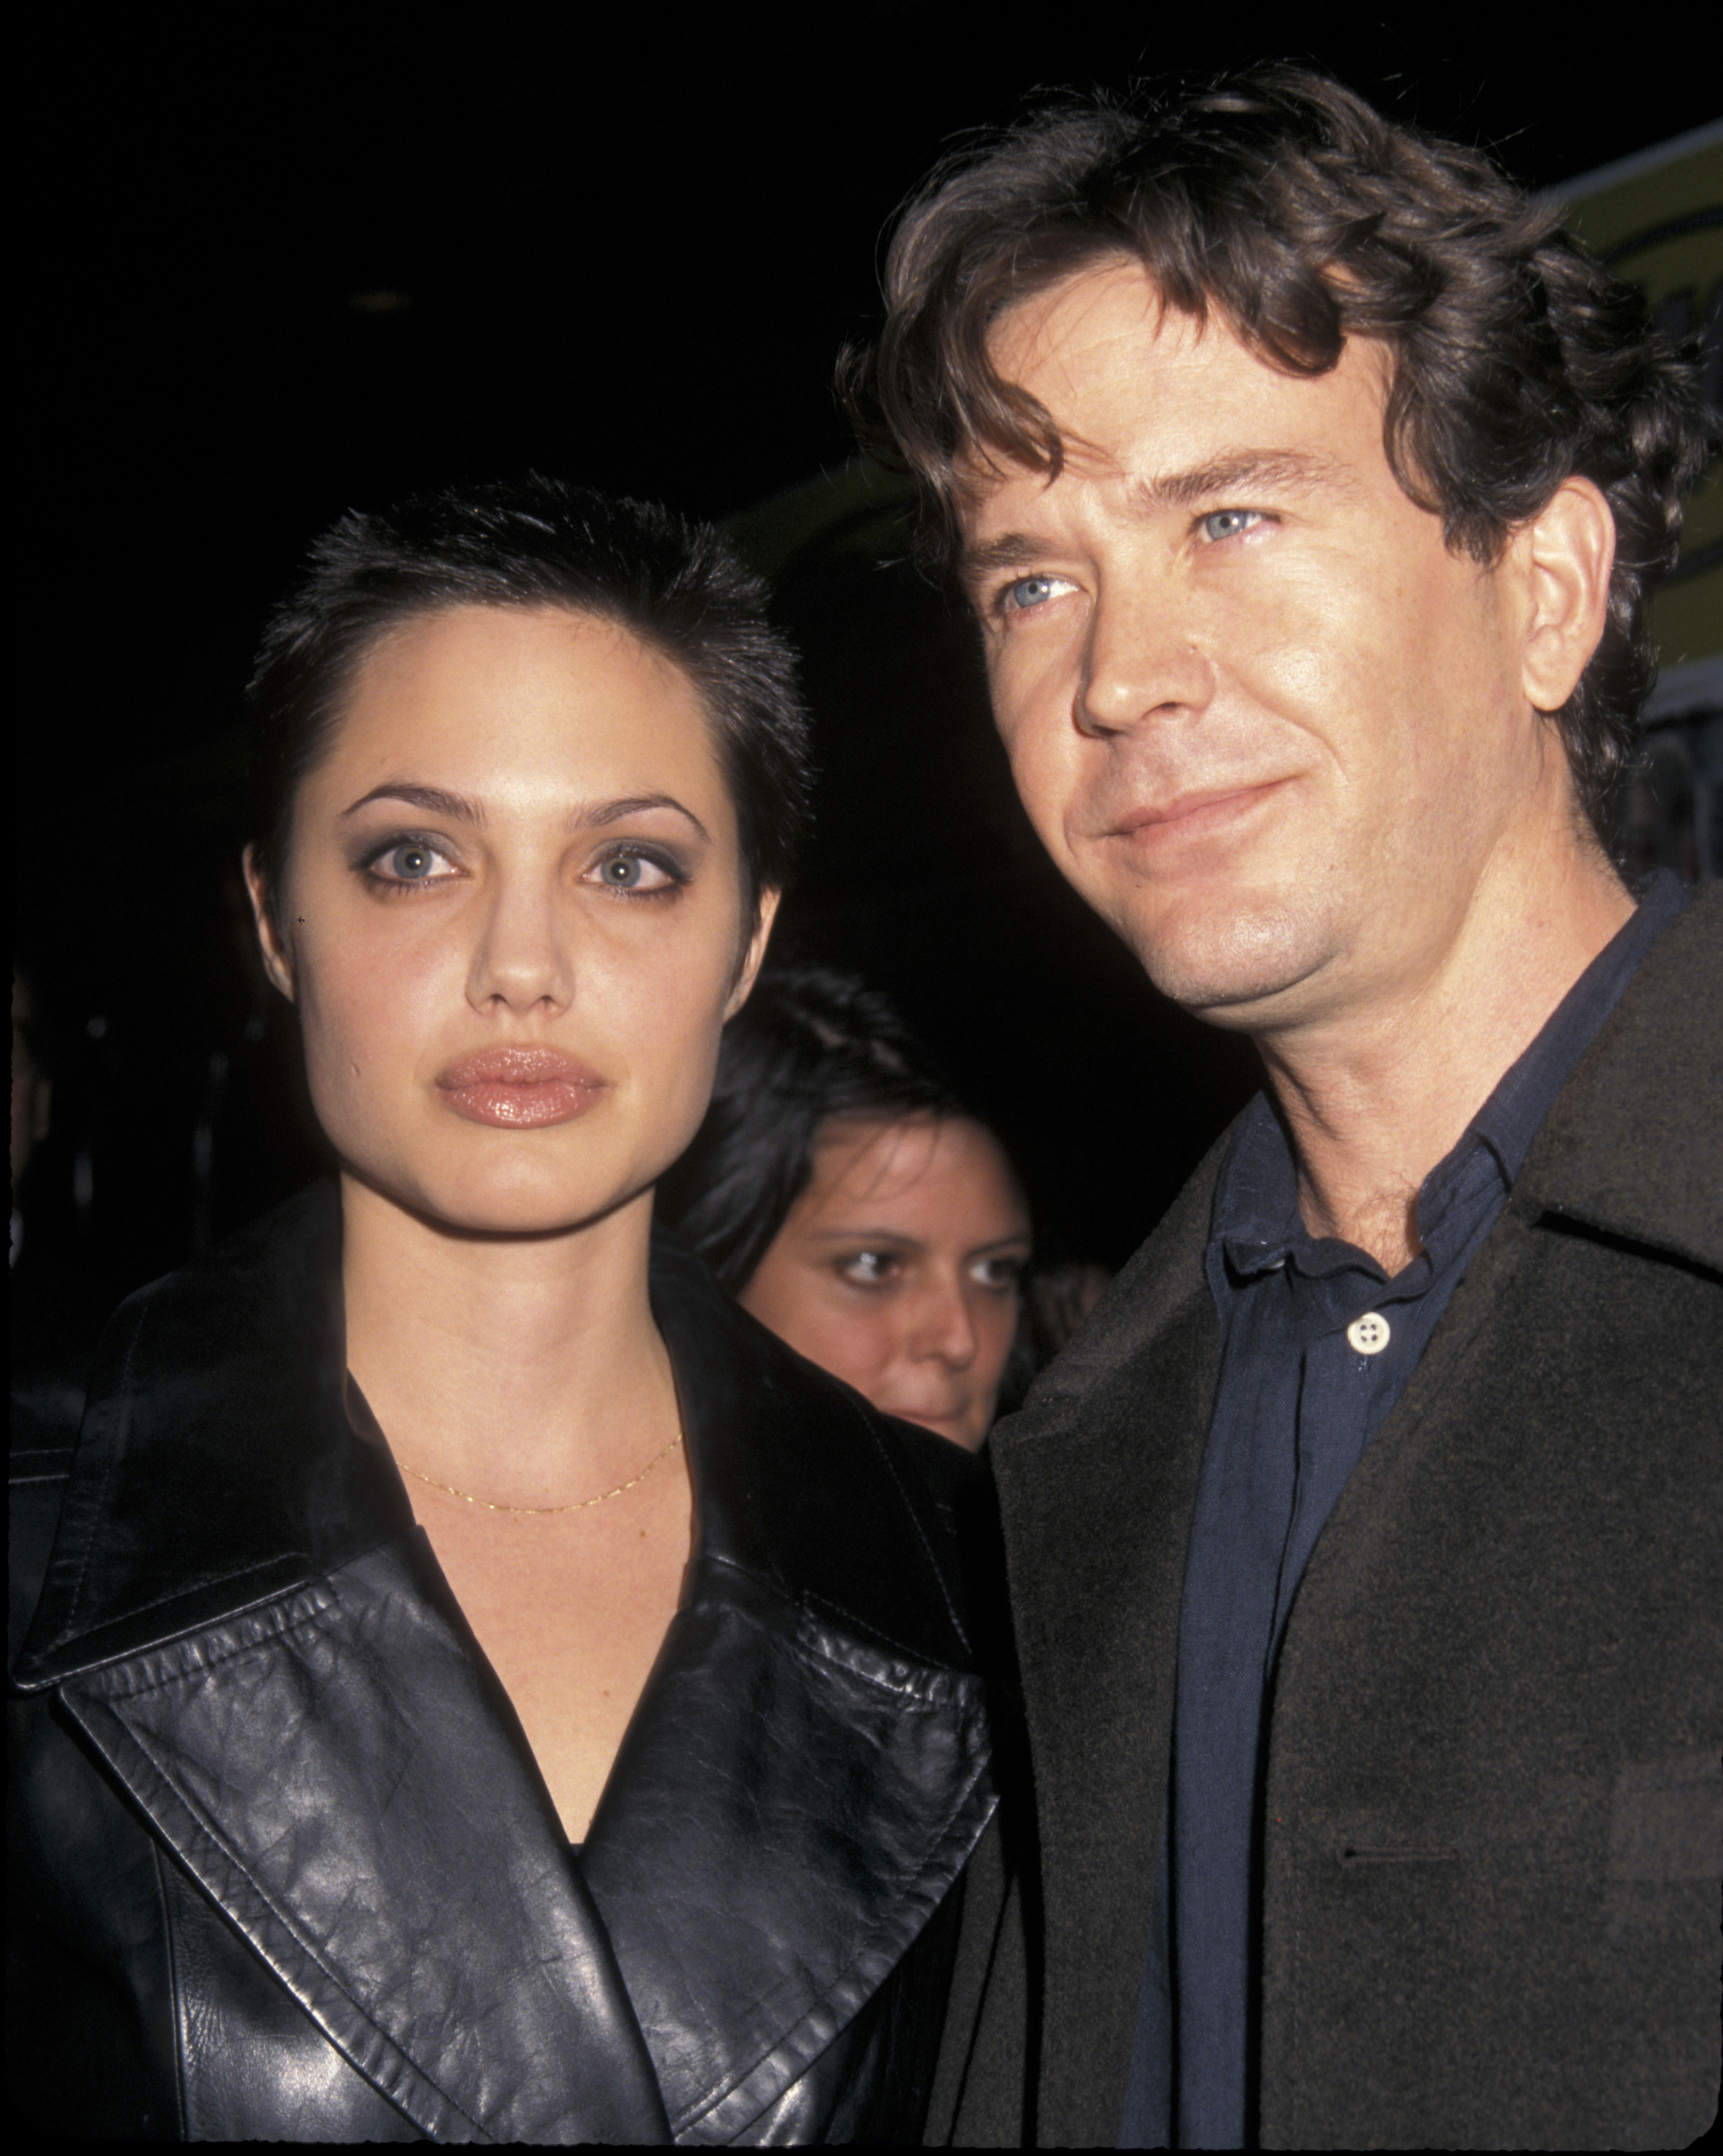 Angelina Jolie and Timothy Hutton at the 1997 premiere of "Playing God" in New York City. | Source: Getty Images